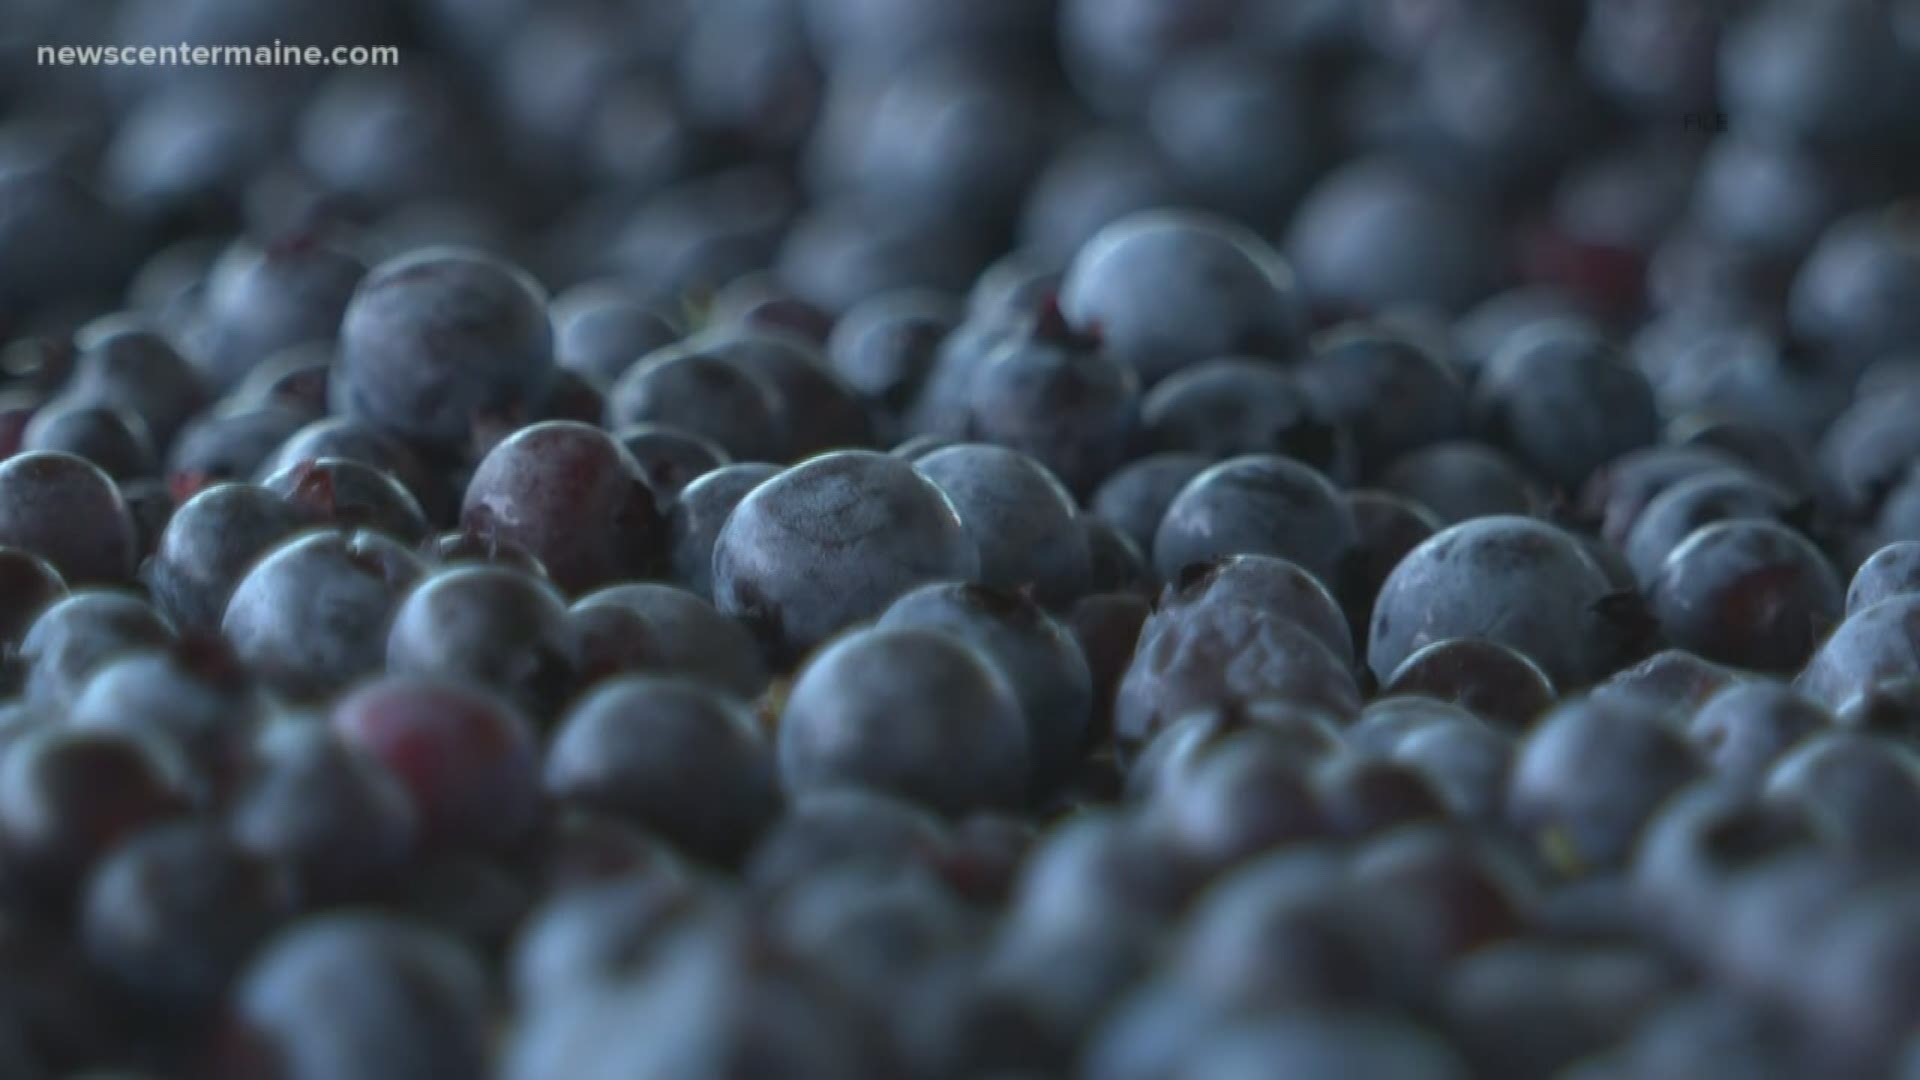 Leaders of Maine's wild blueberries industry want to reintroduce their product to consumers.